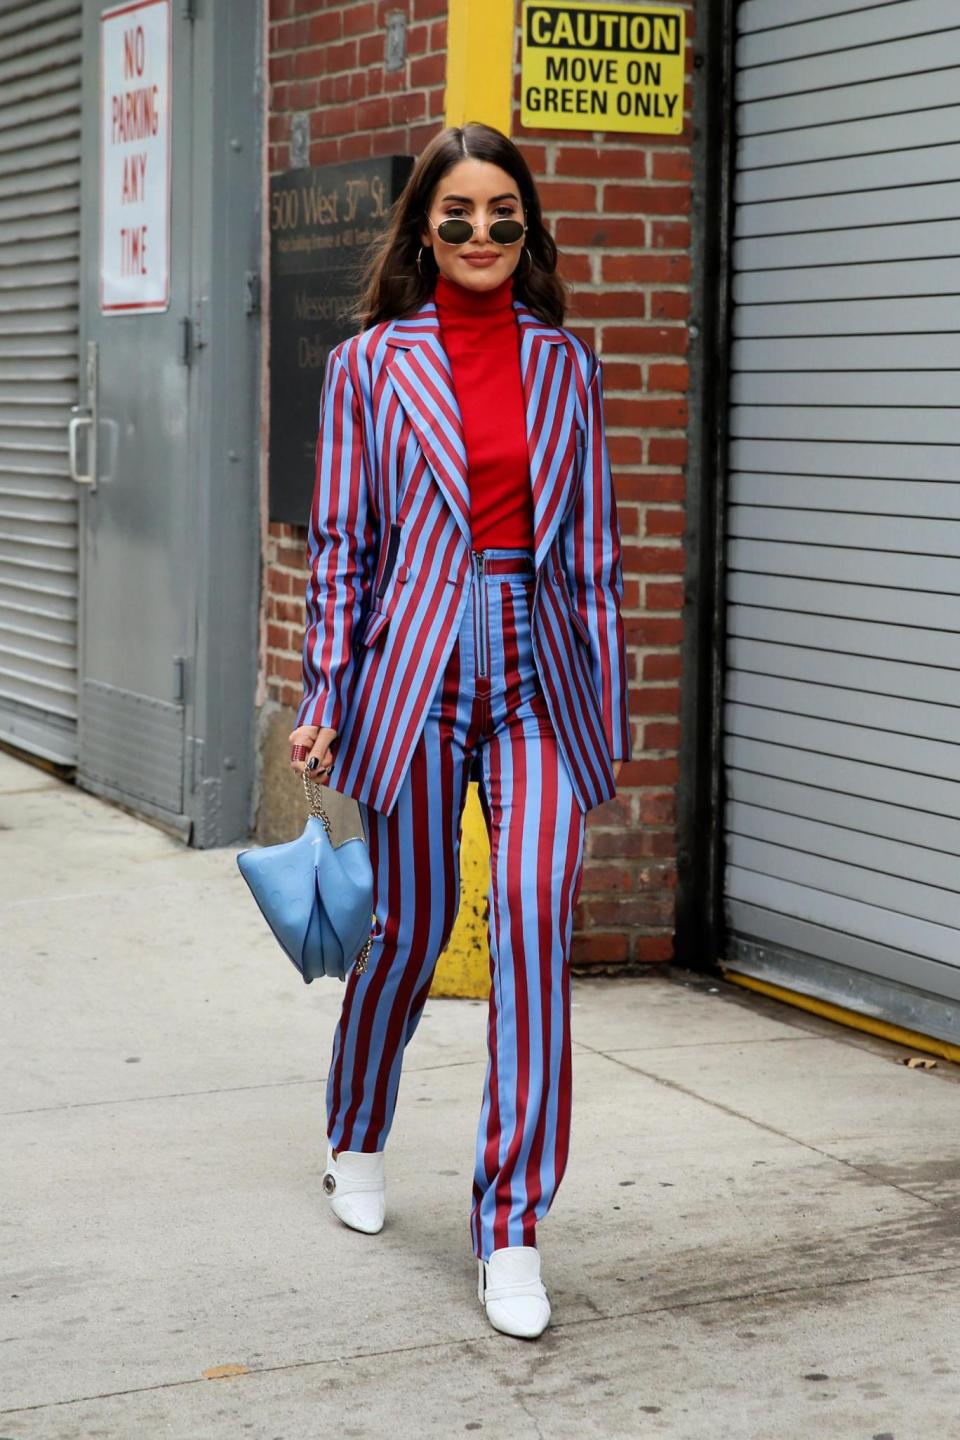 Fashion blogger Camila Coelho, wearing a silk striped pants suit, attends Self-Portrait AW18 show, NYC February 2018 (Christopher Peterson/Splash News)